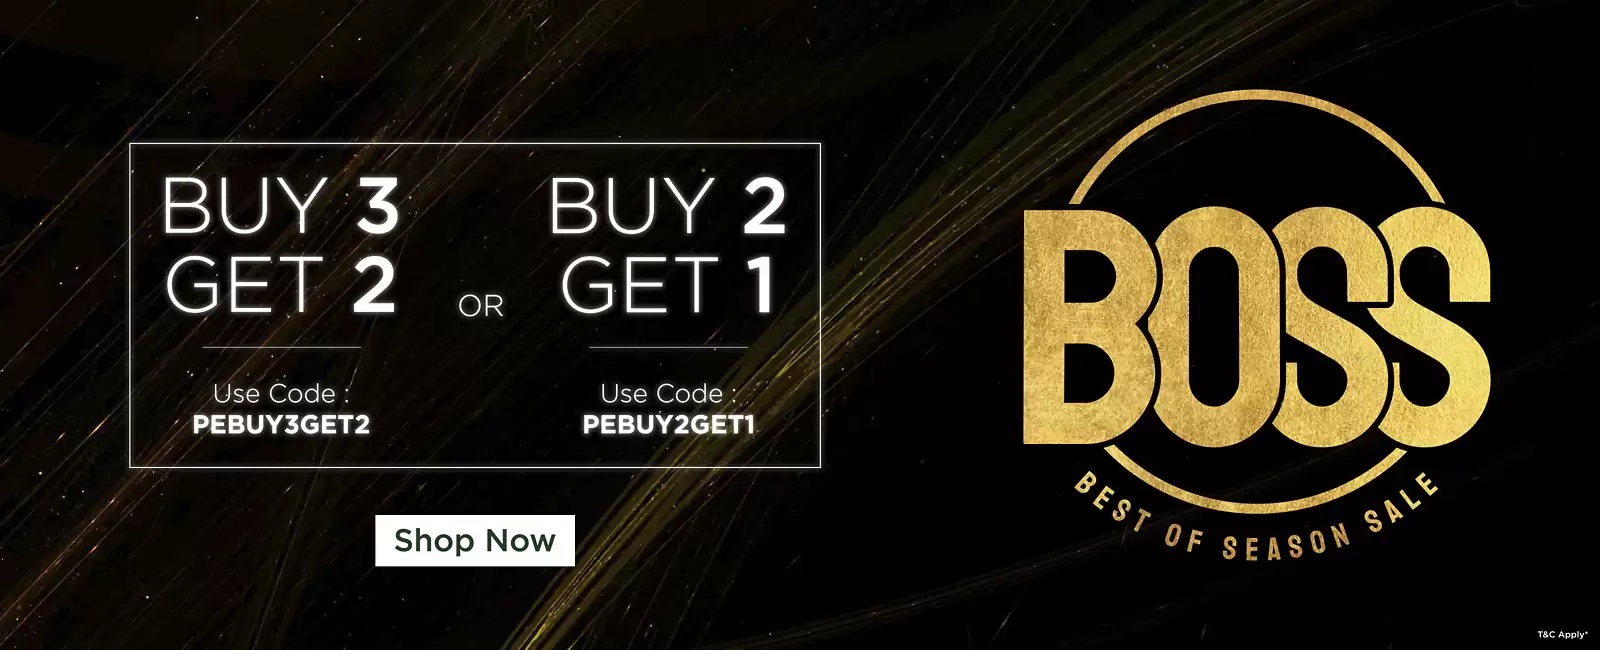 Buy 2 & Get 1 Free or Buy 3 get 2 free With This Discount Coupon At Peterengland